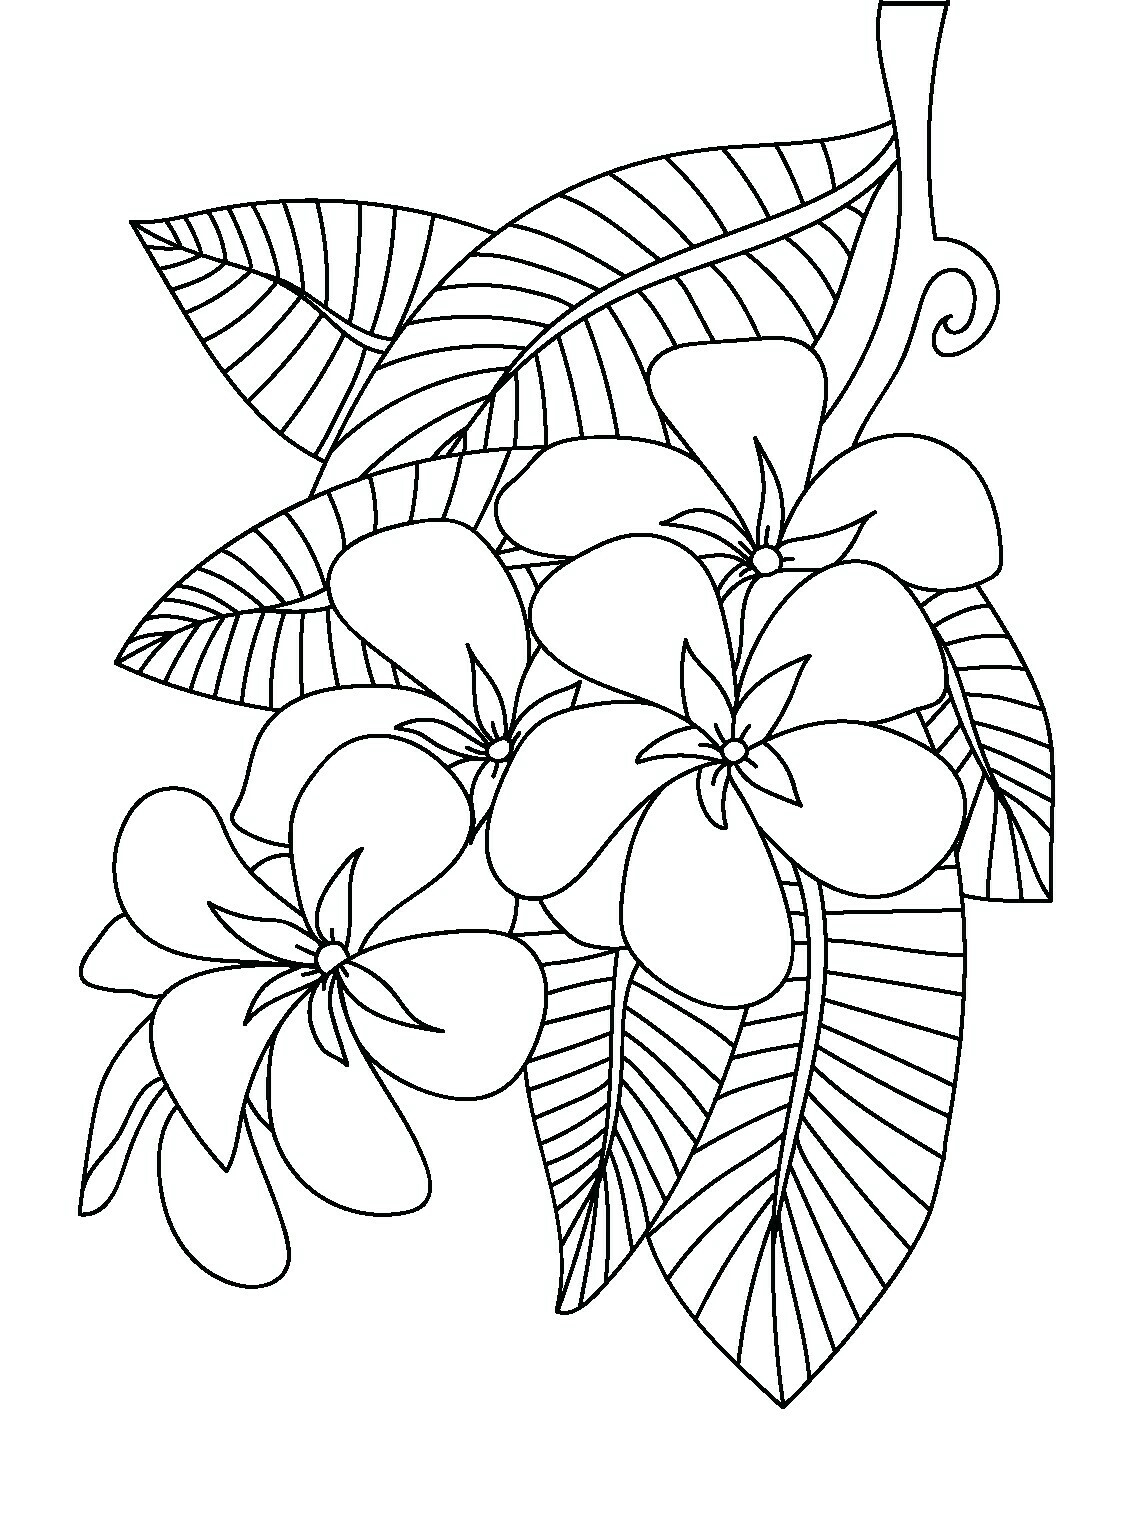 Hibiscus Flower Coloring Pages Coloring Books 41 Splendi Hawaiian Flower Coloring Pages